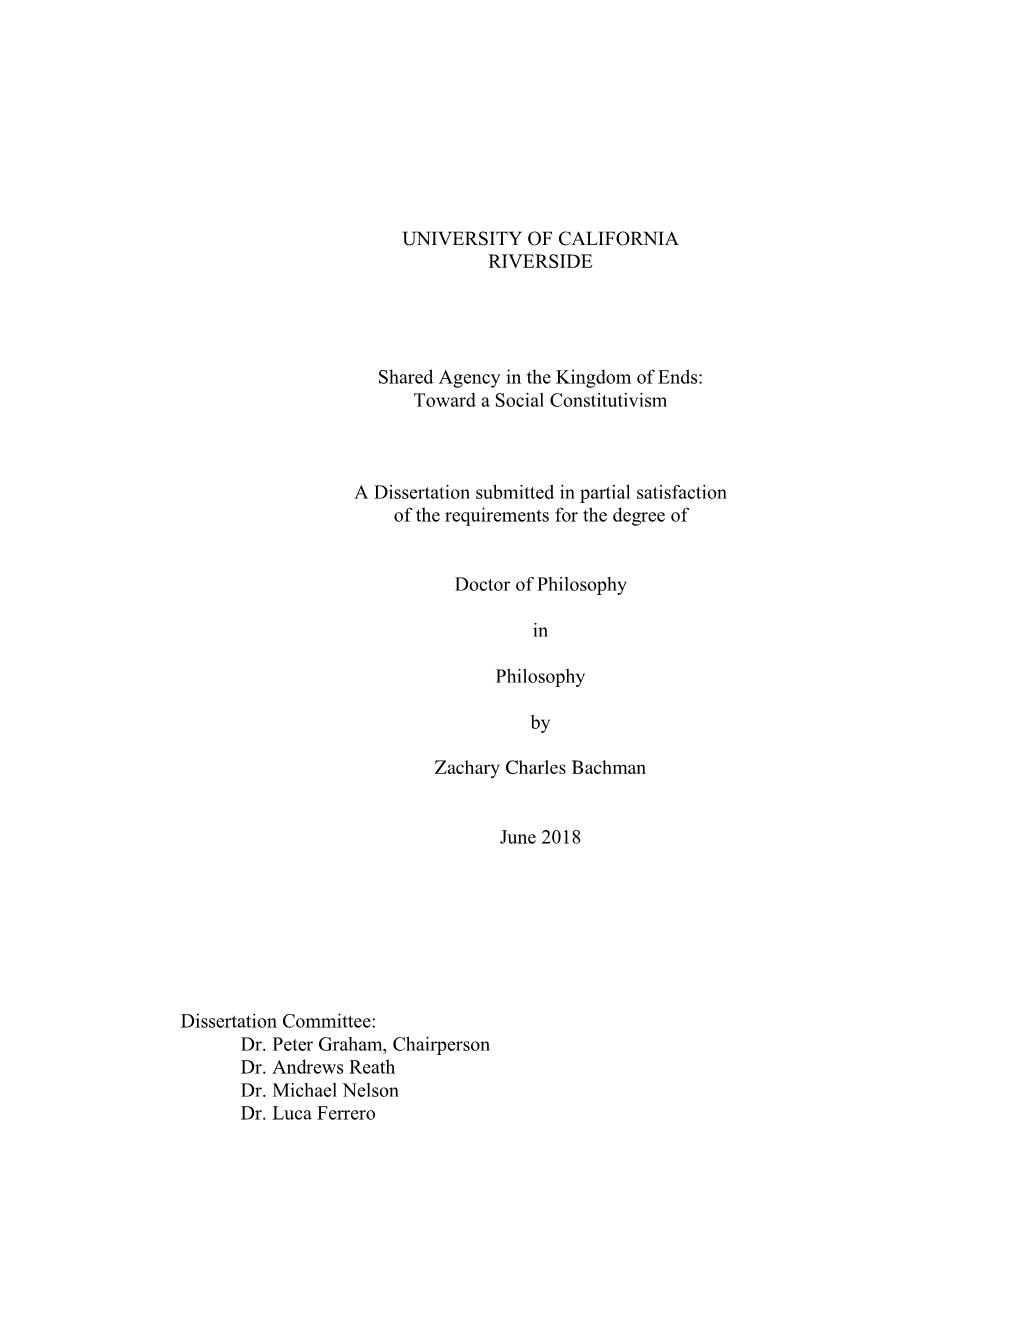 Toward a Social Constitutivism a Dissertation Submitte